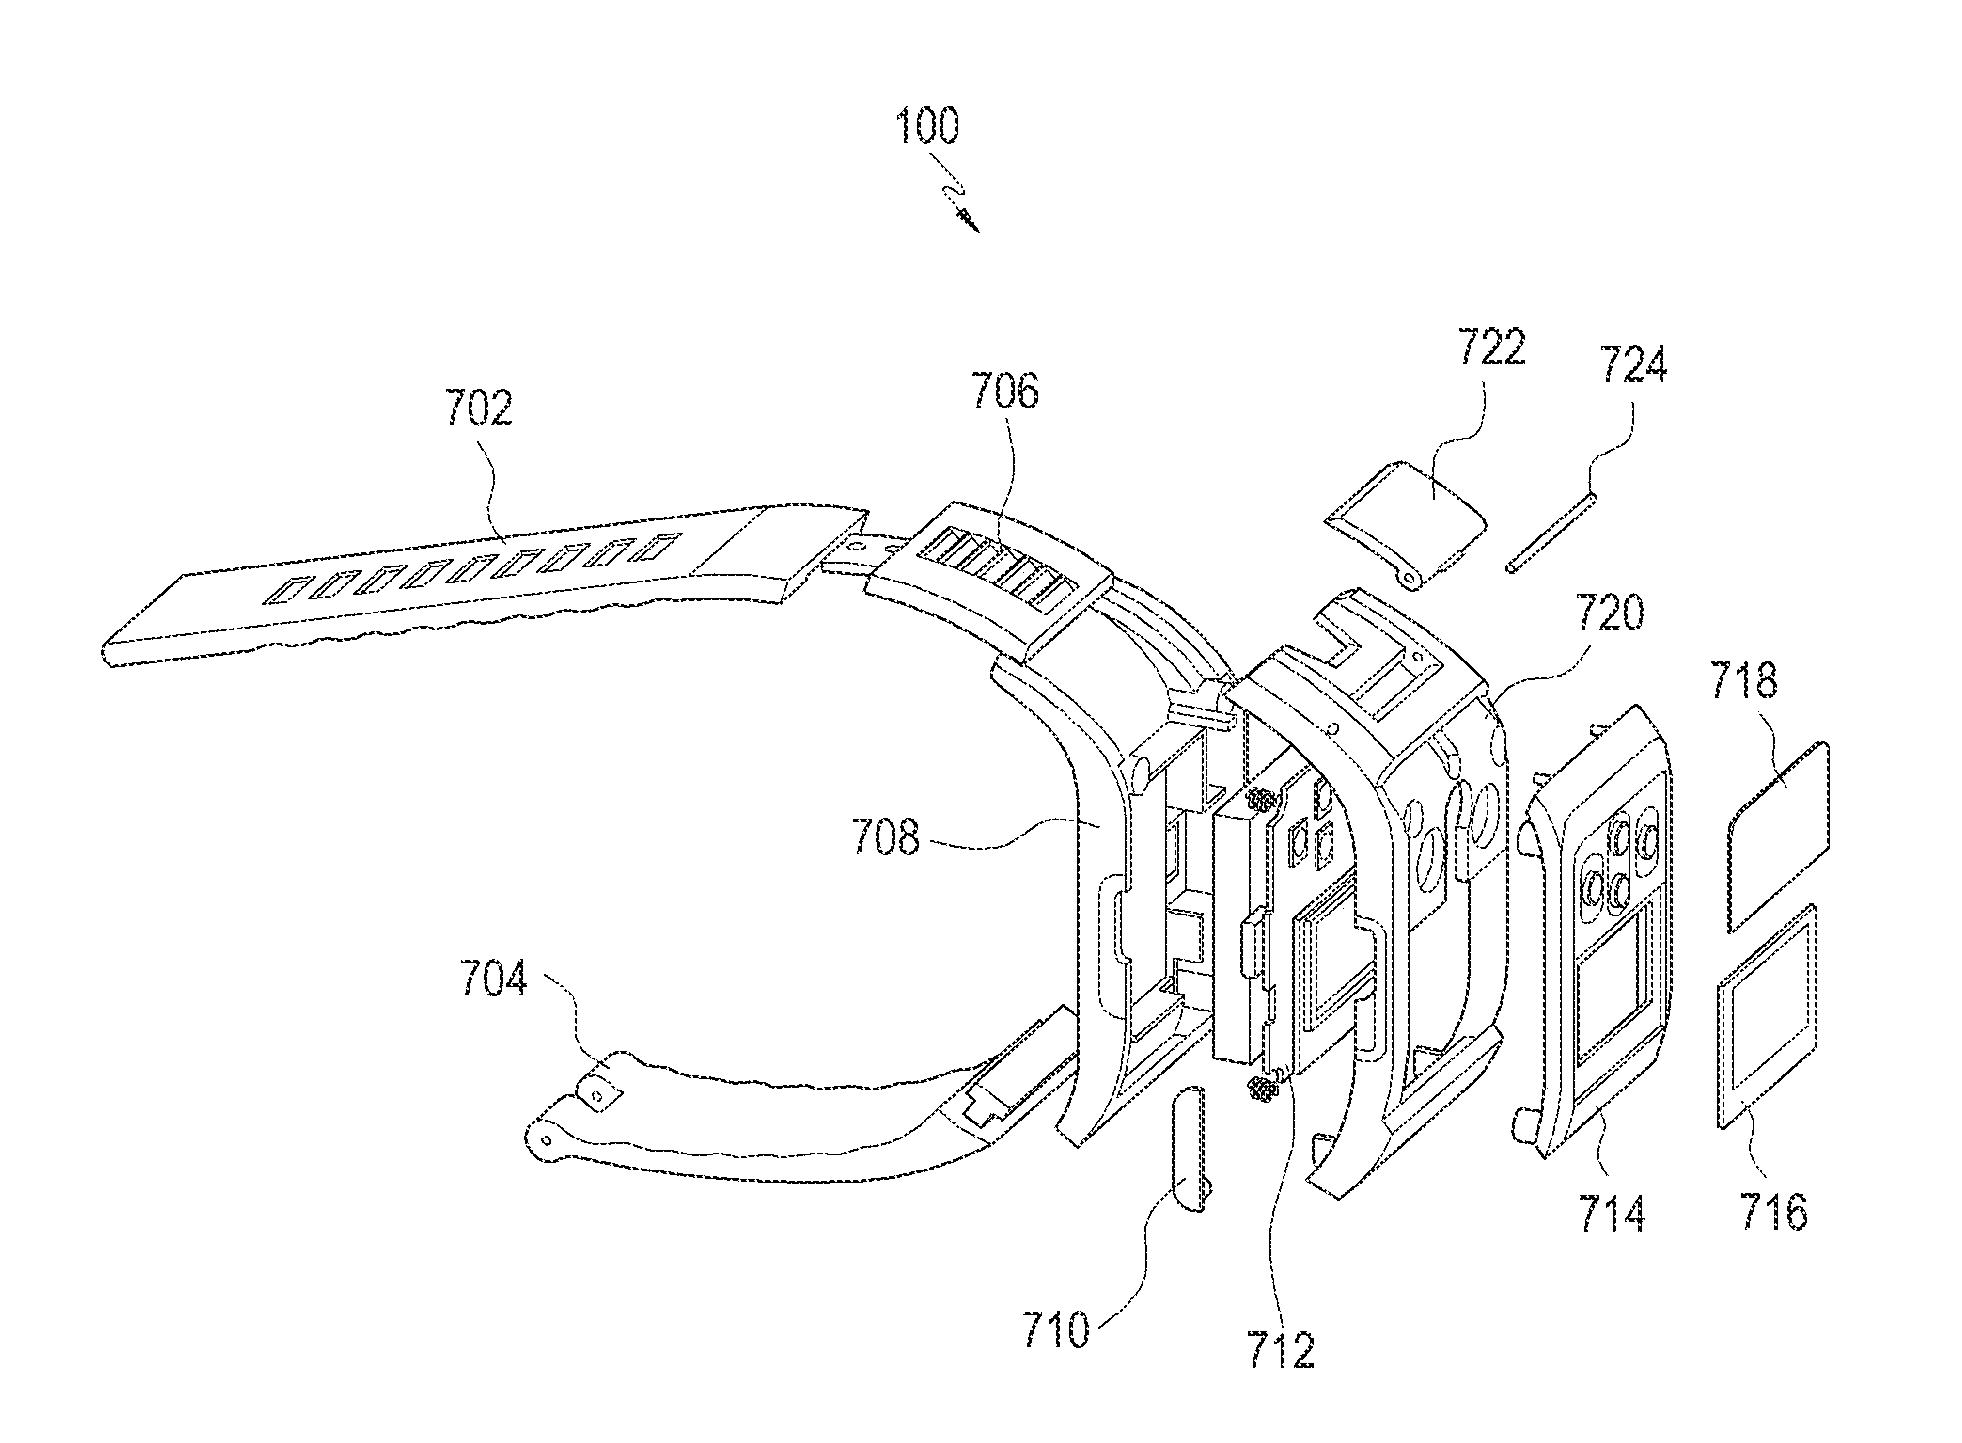 Apparatus and method for measuring biological signal